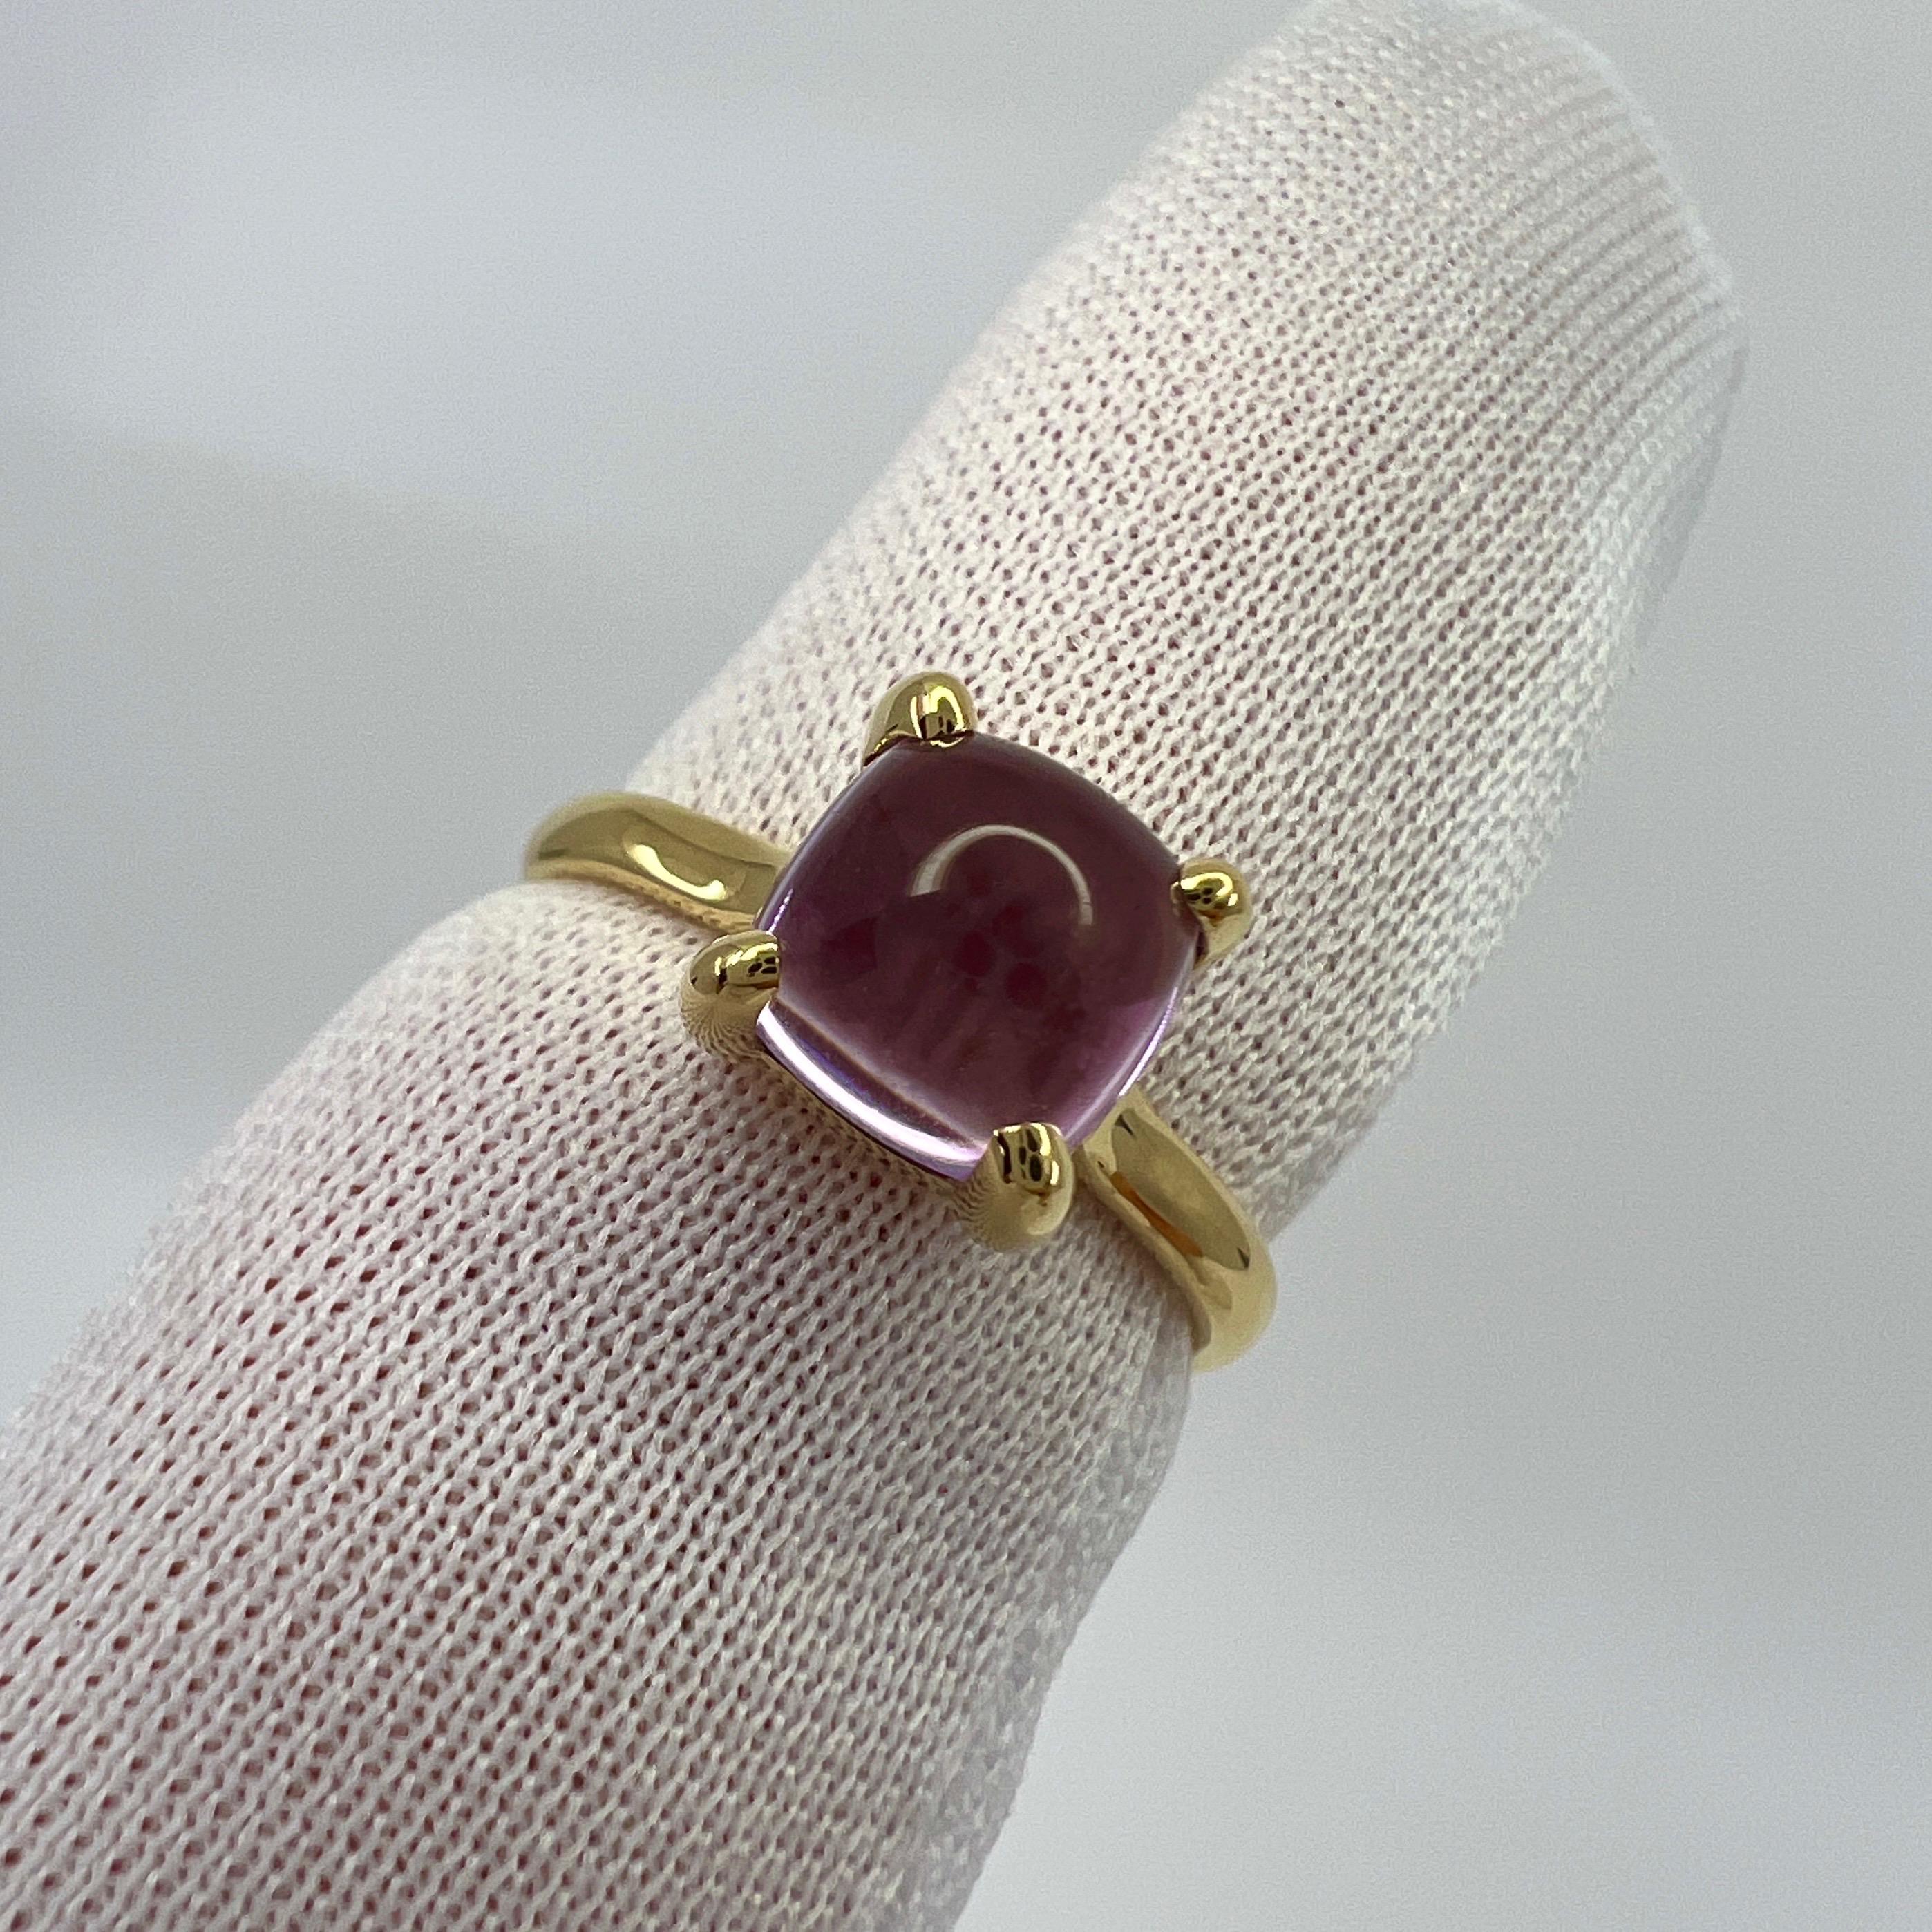 Rare Tiffany & Co. Paloma Picasso Amethyst Sugar Stack Loaf 18k Yellow Gold Ring For Sale 4